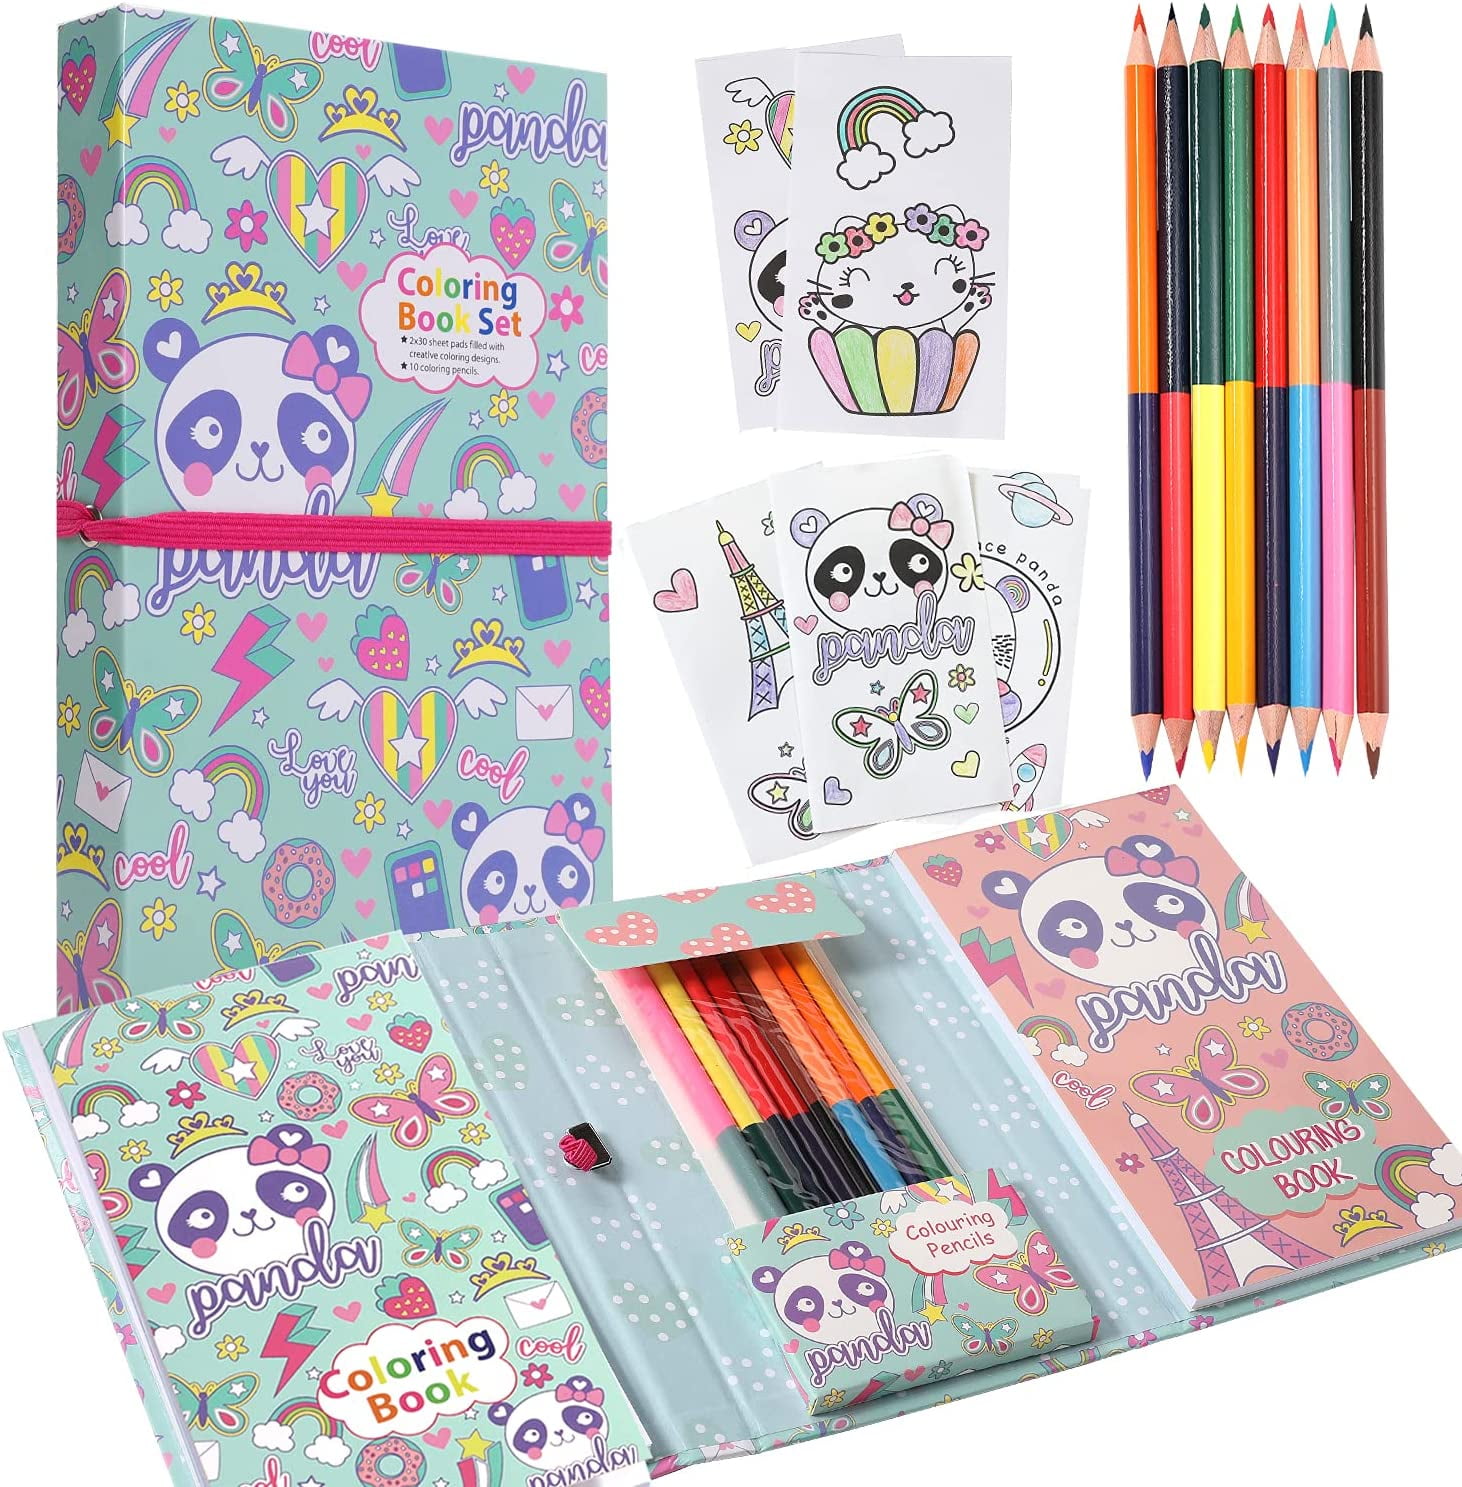 YOYTOO Cat Coloring Pads Kit for Girls, Unicorn Coloring Book with 30  Coloring Pages 10 Rainbow Scratch Papers 16 Colored Pencils for Drawing